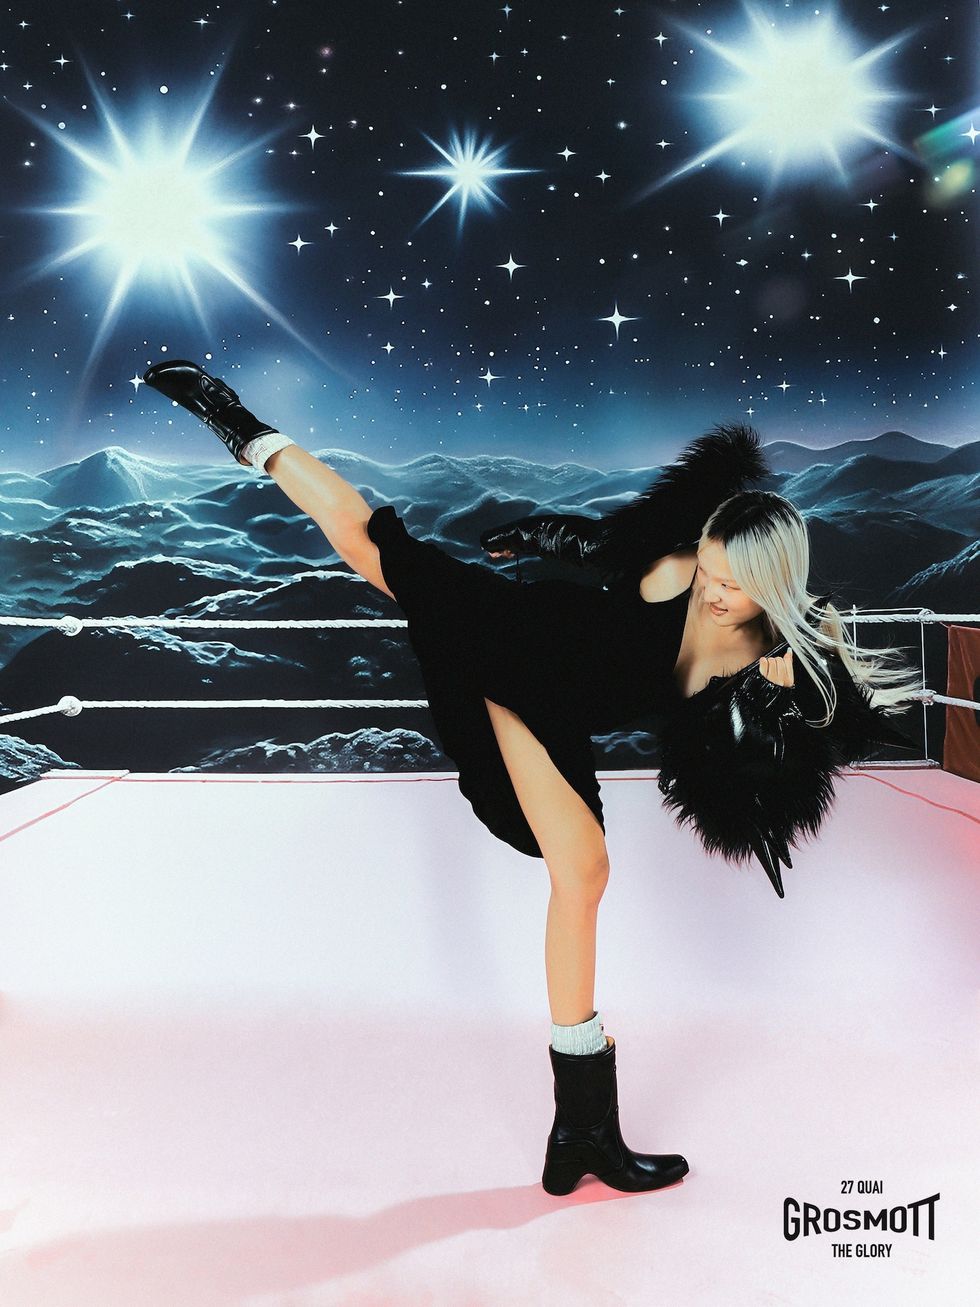 a person in a black dress on ice with a bright light behind the